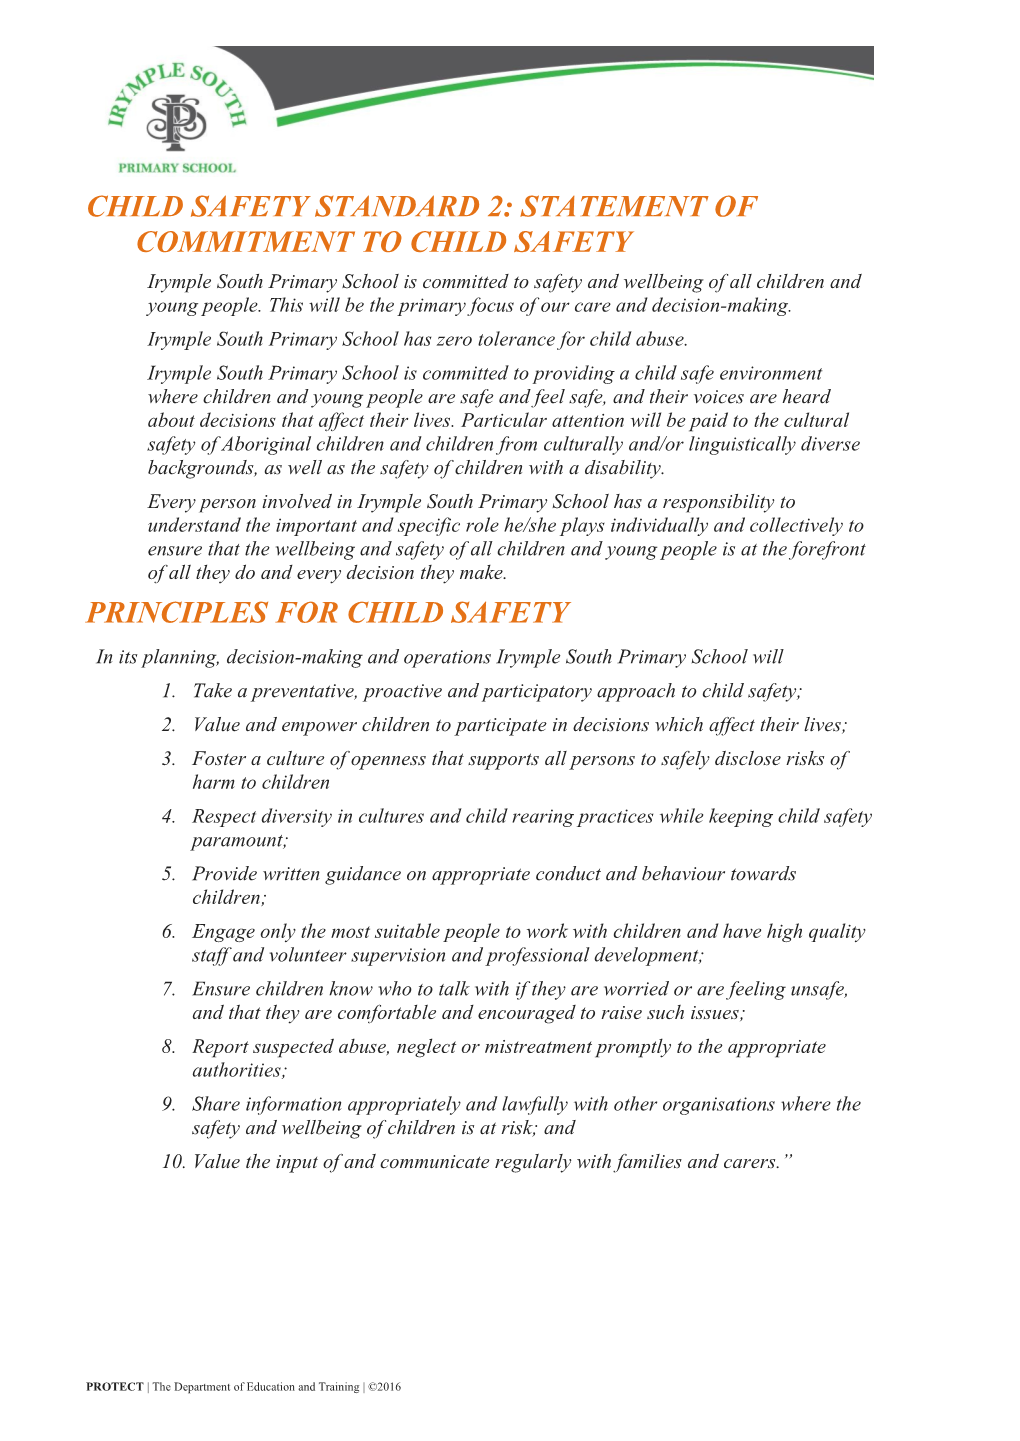 Child Safety Standard 2: Statement of Commitment to Child Safety